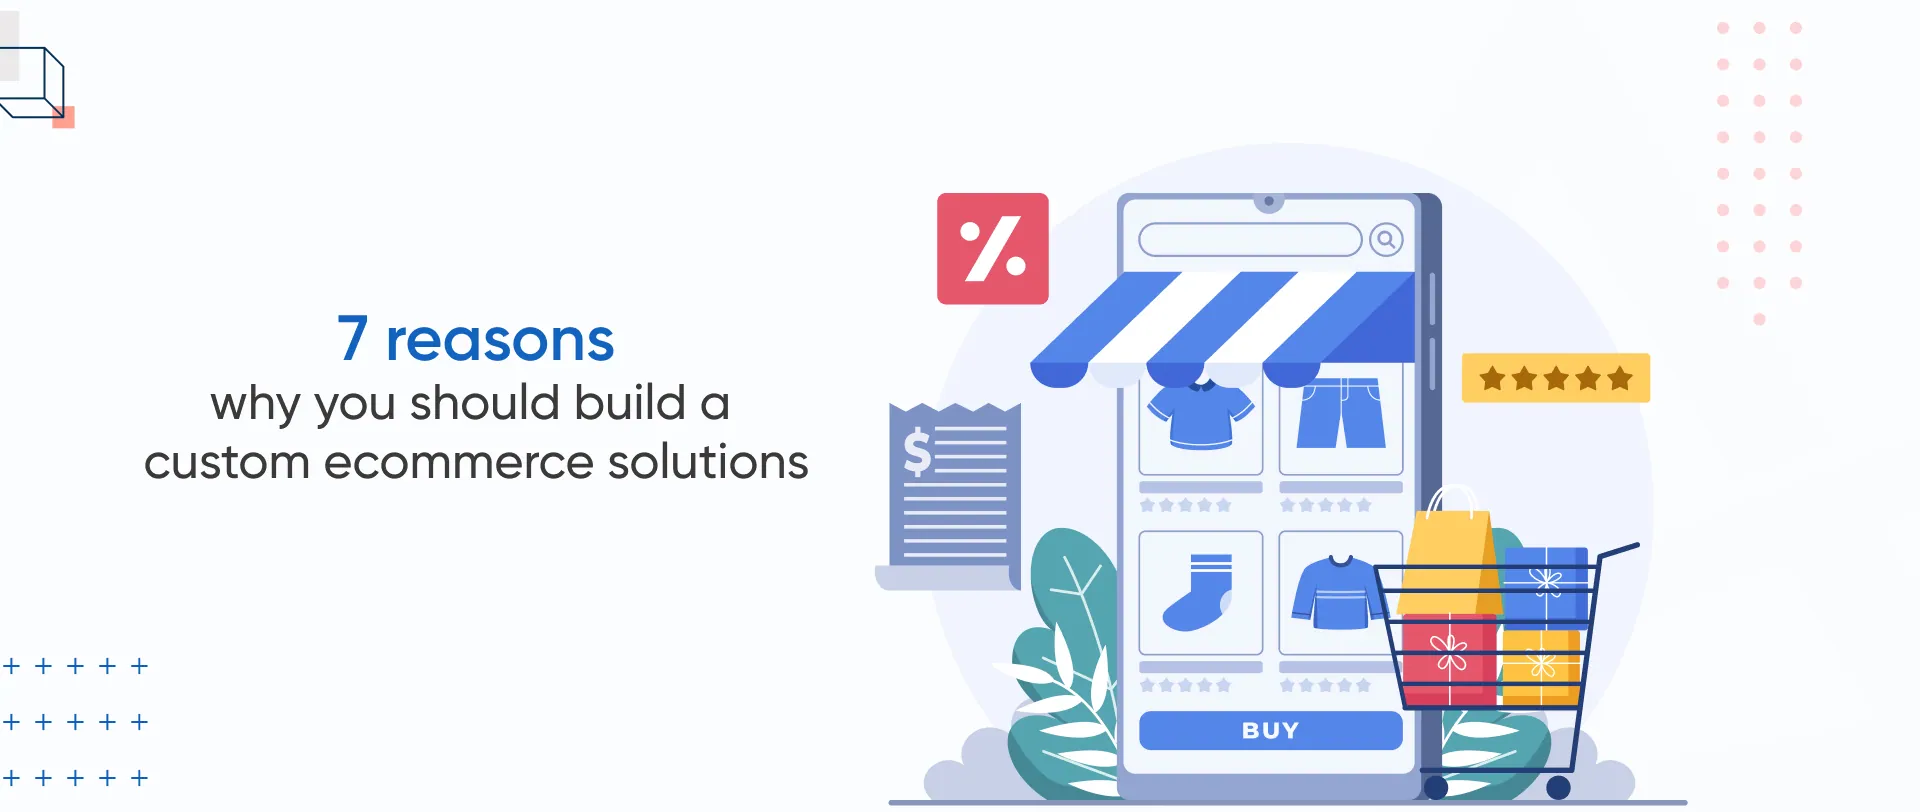 Why you should build a custom e-commerce solution?